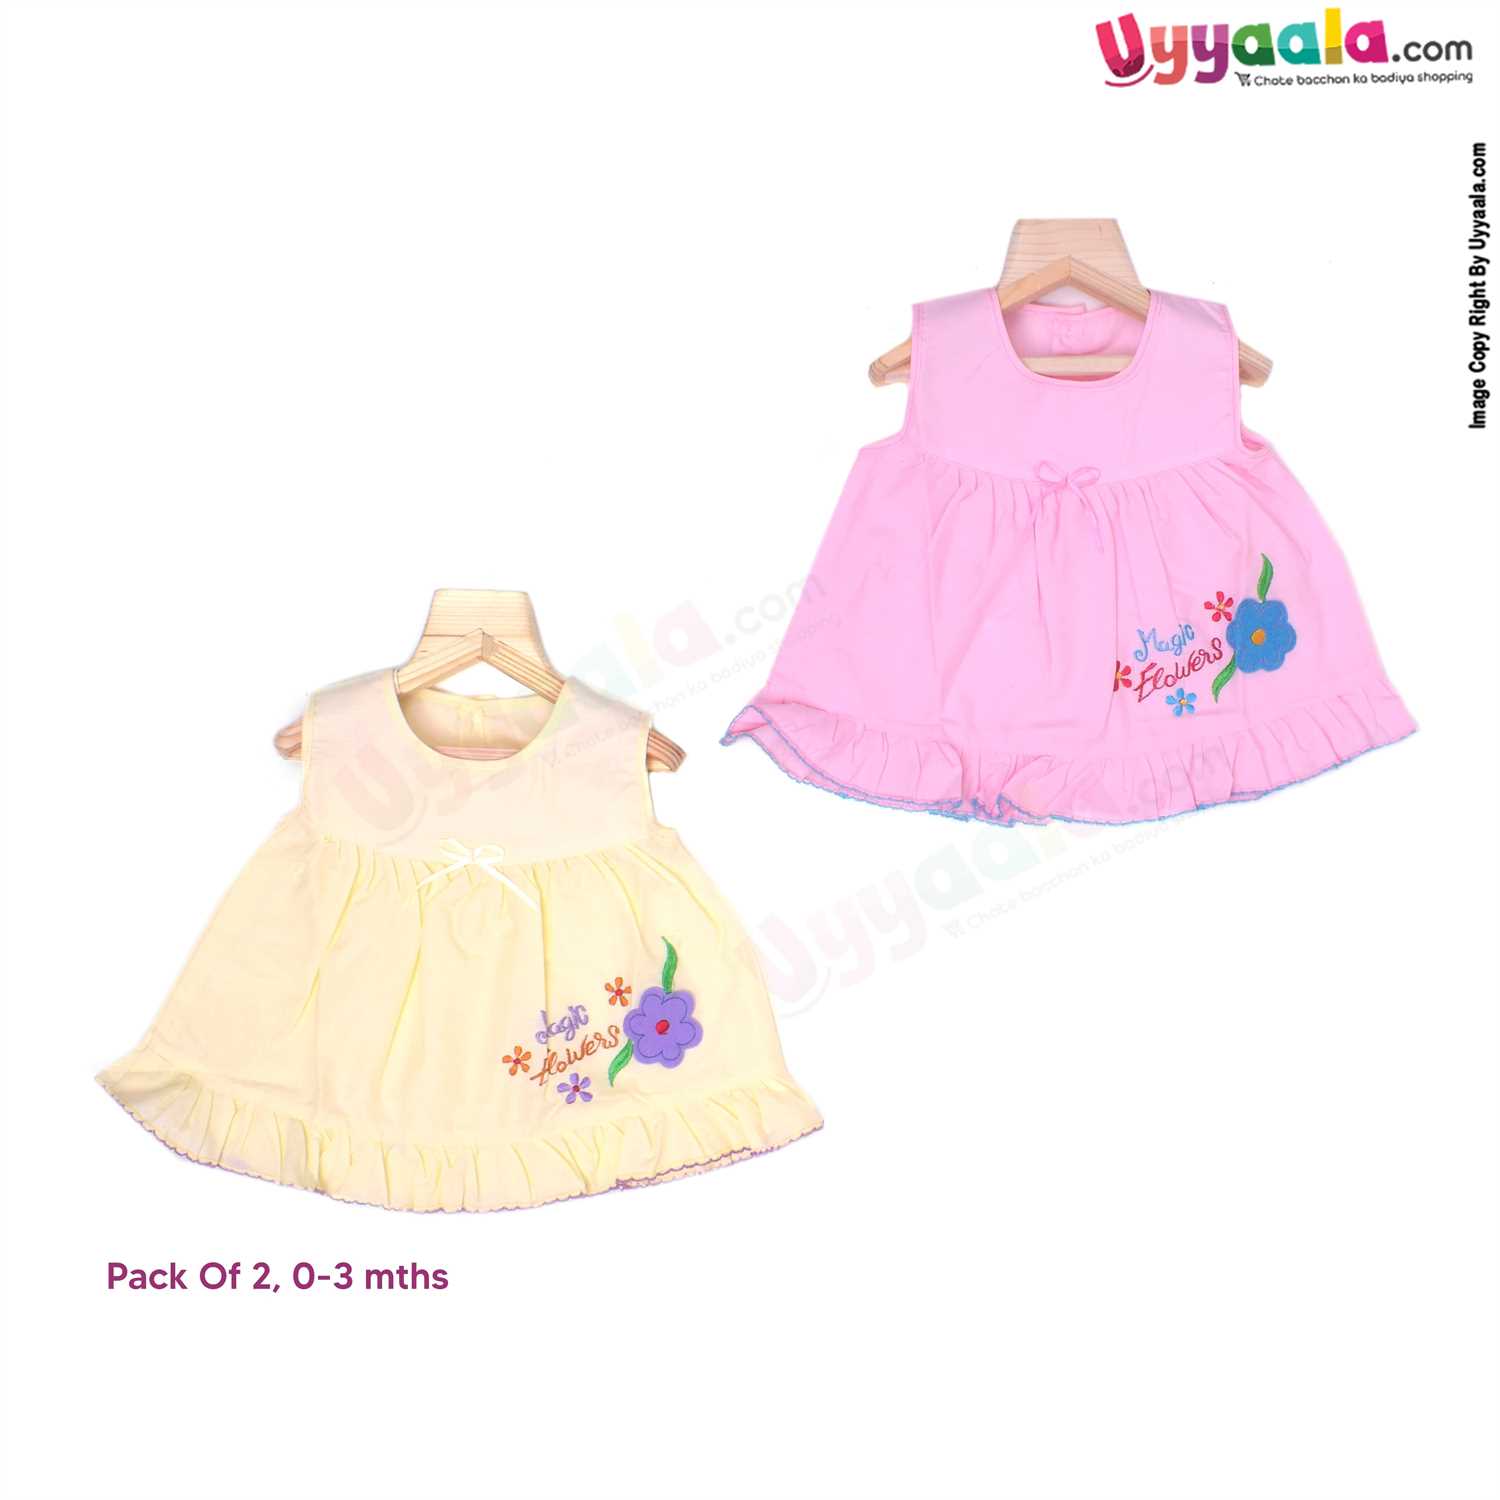 Half Sleeve Baby Frock Back Open Button model , Premium Quality Soft Hosiery Cotton Flower Print 2 Pack - Pink & Yellow (0-3M)